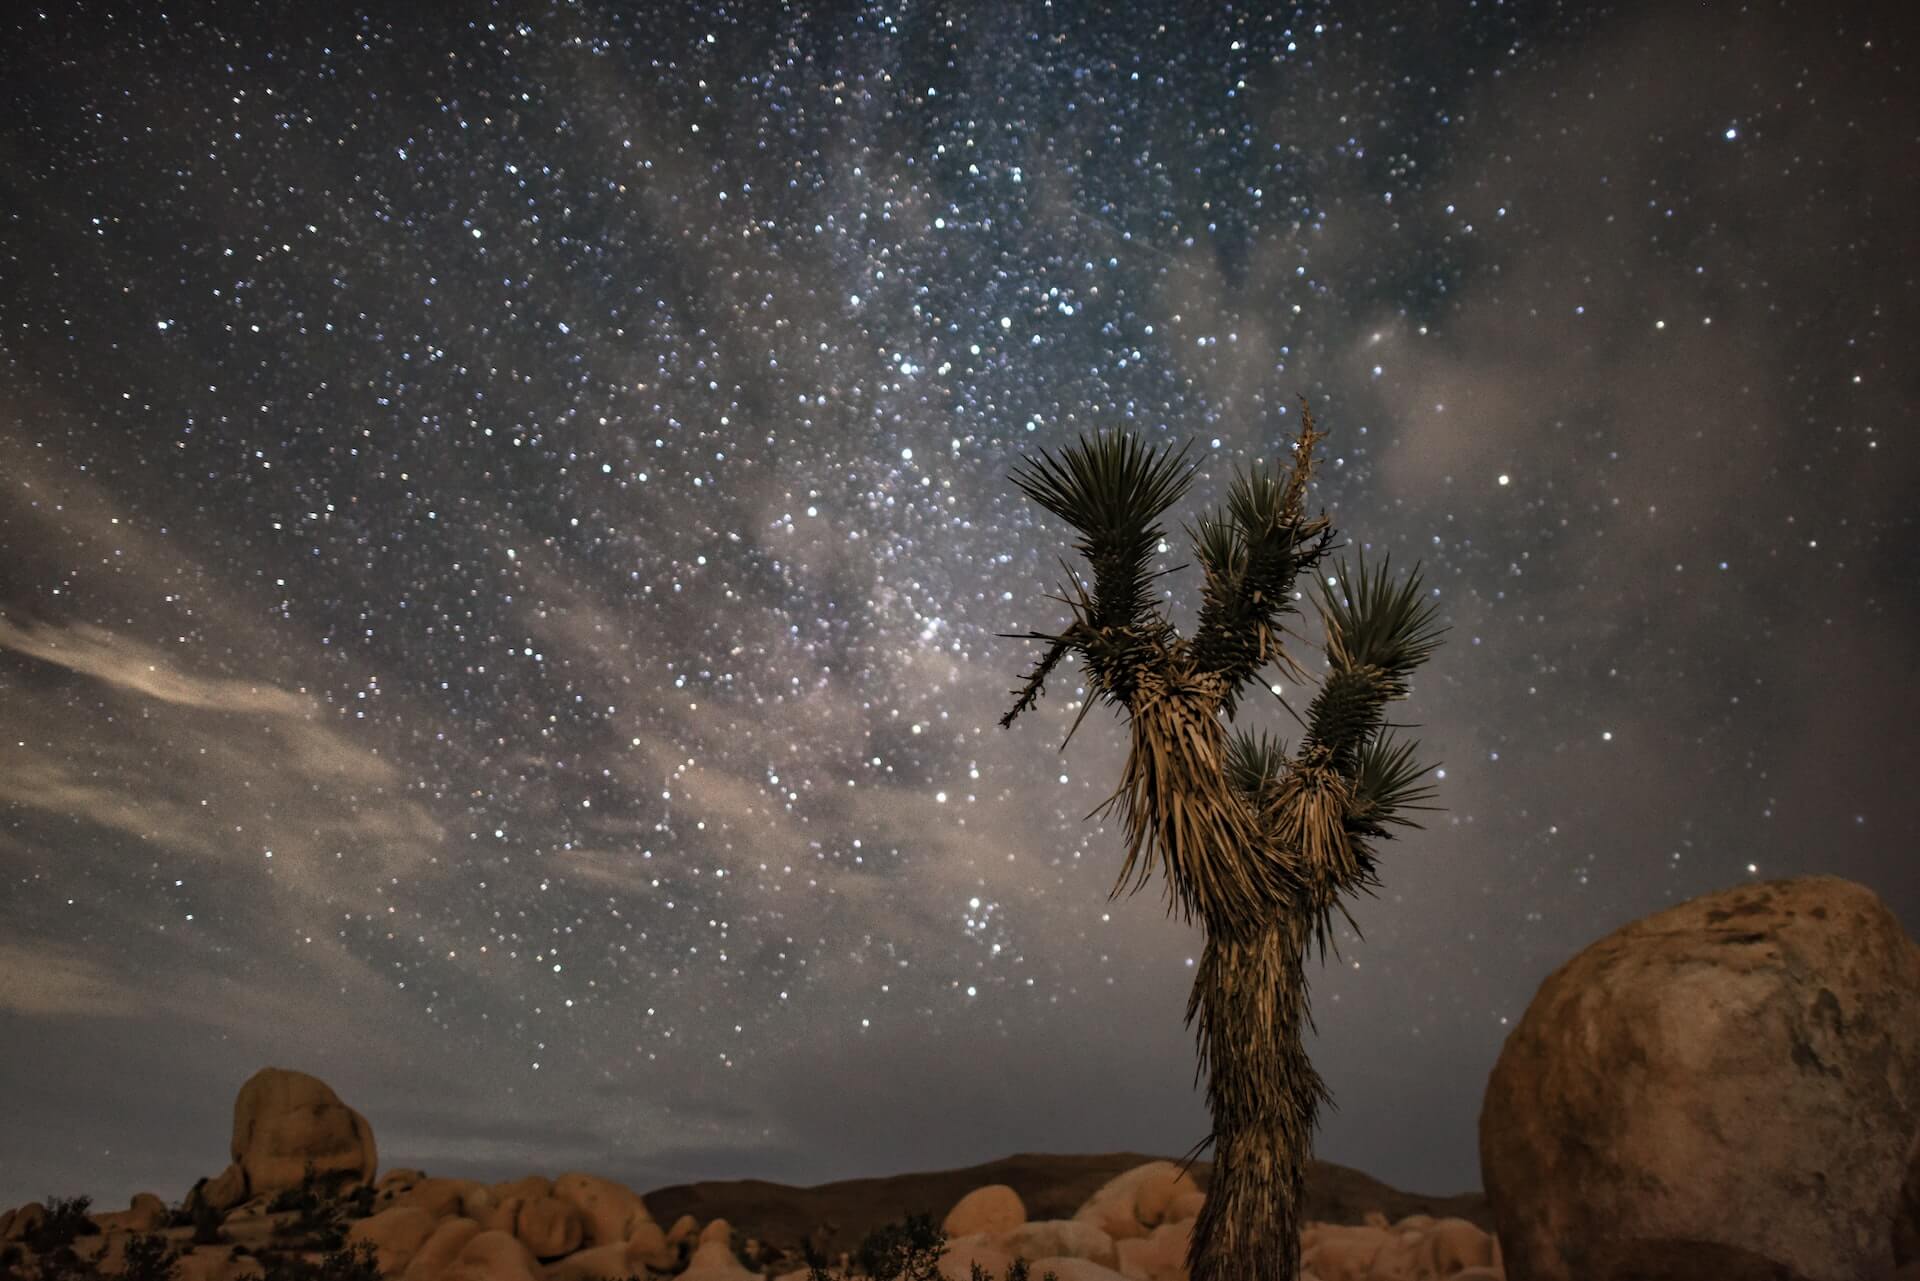 Stargazing in Joshua Tree National Park Complete Guide for Beginners